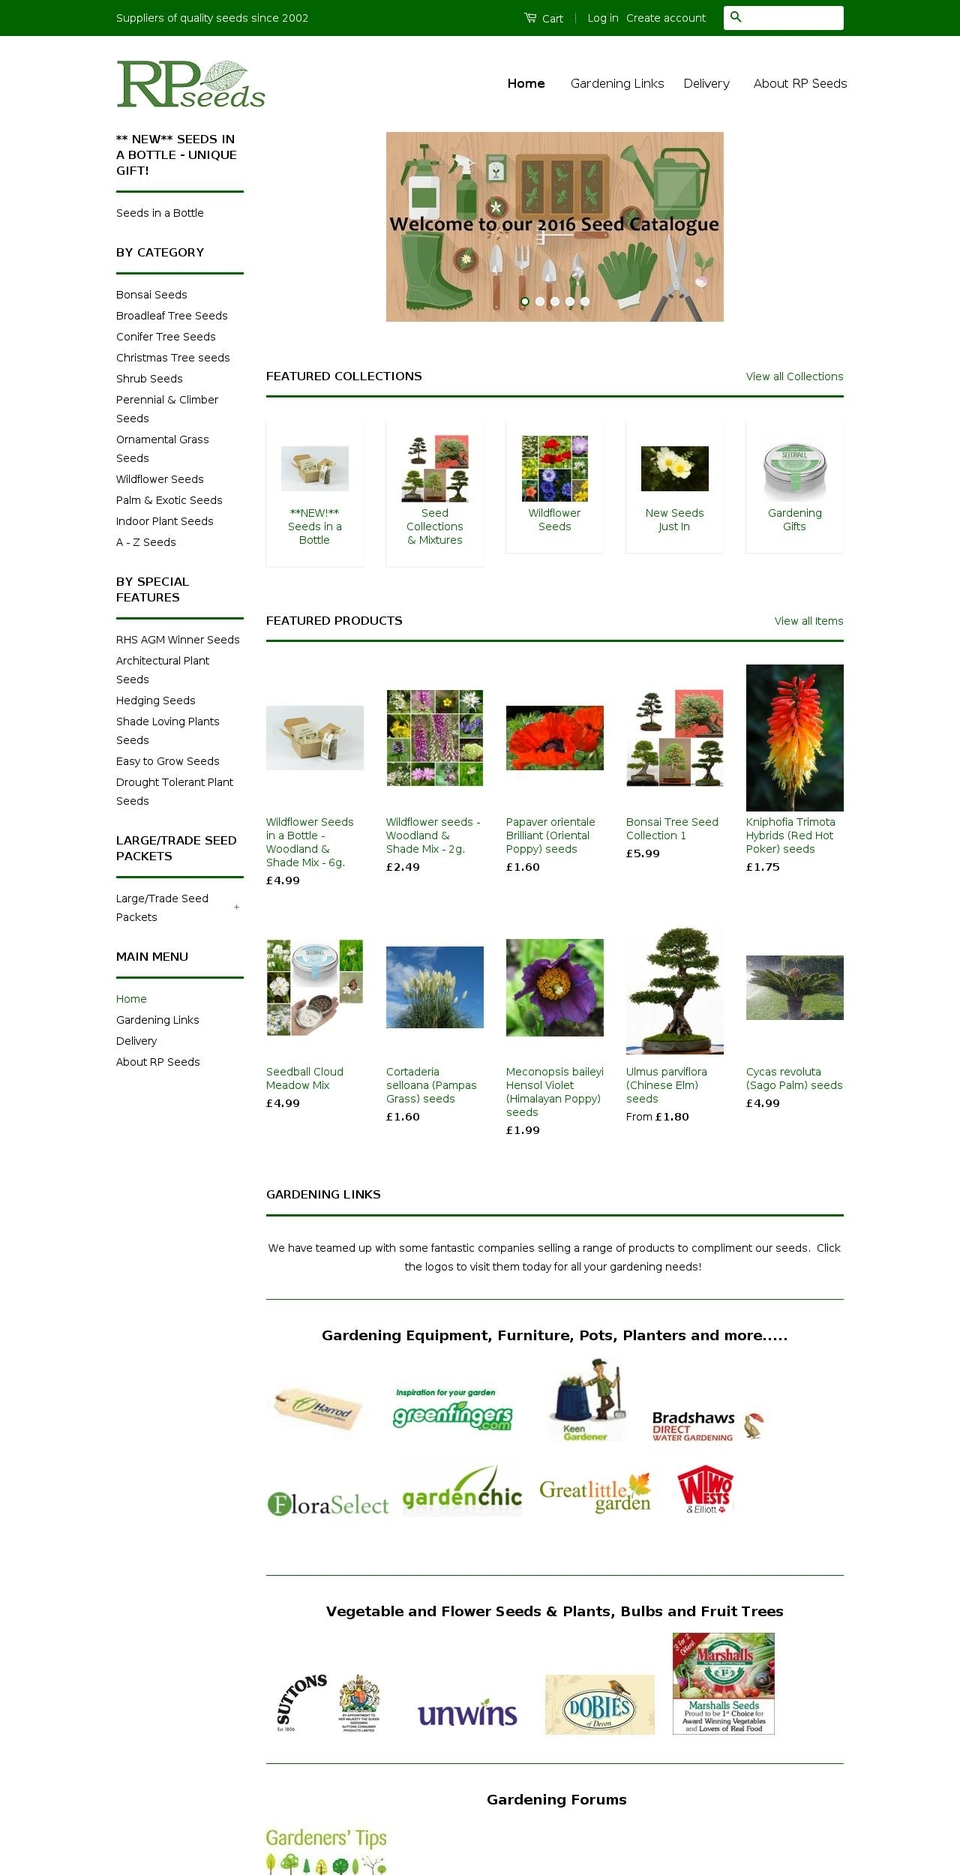 Craft Shopify theme site example rpseeds.co.uk